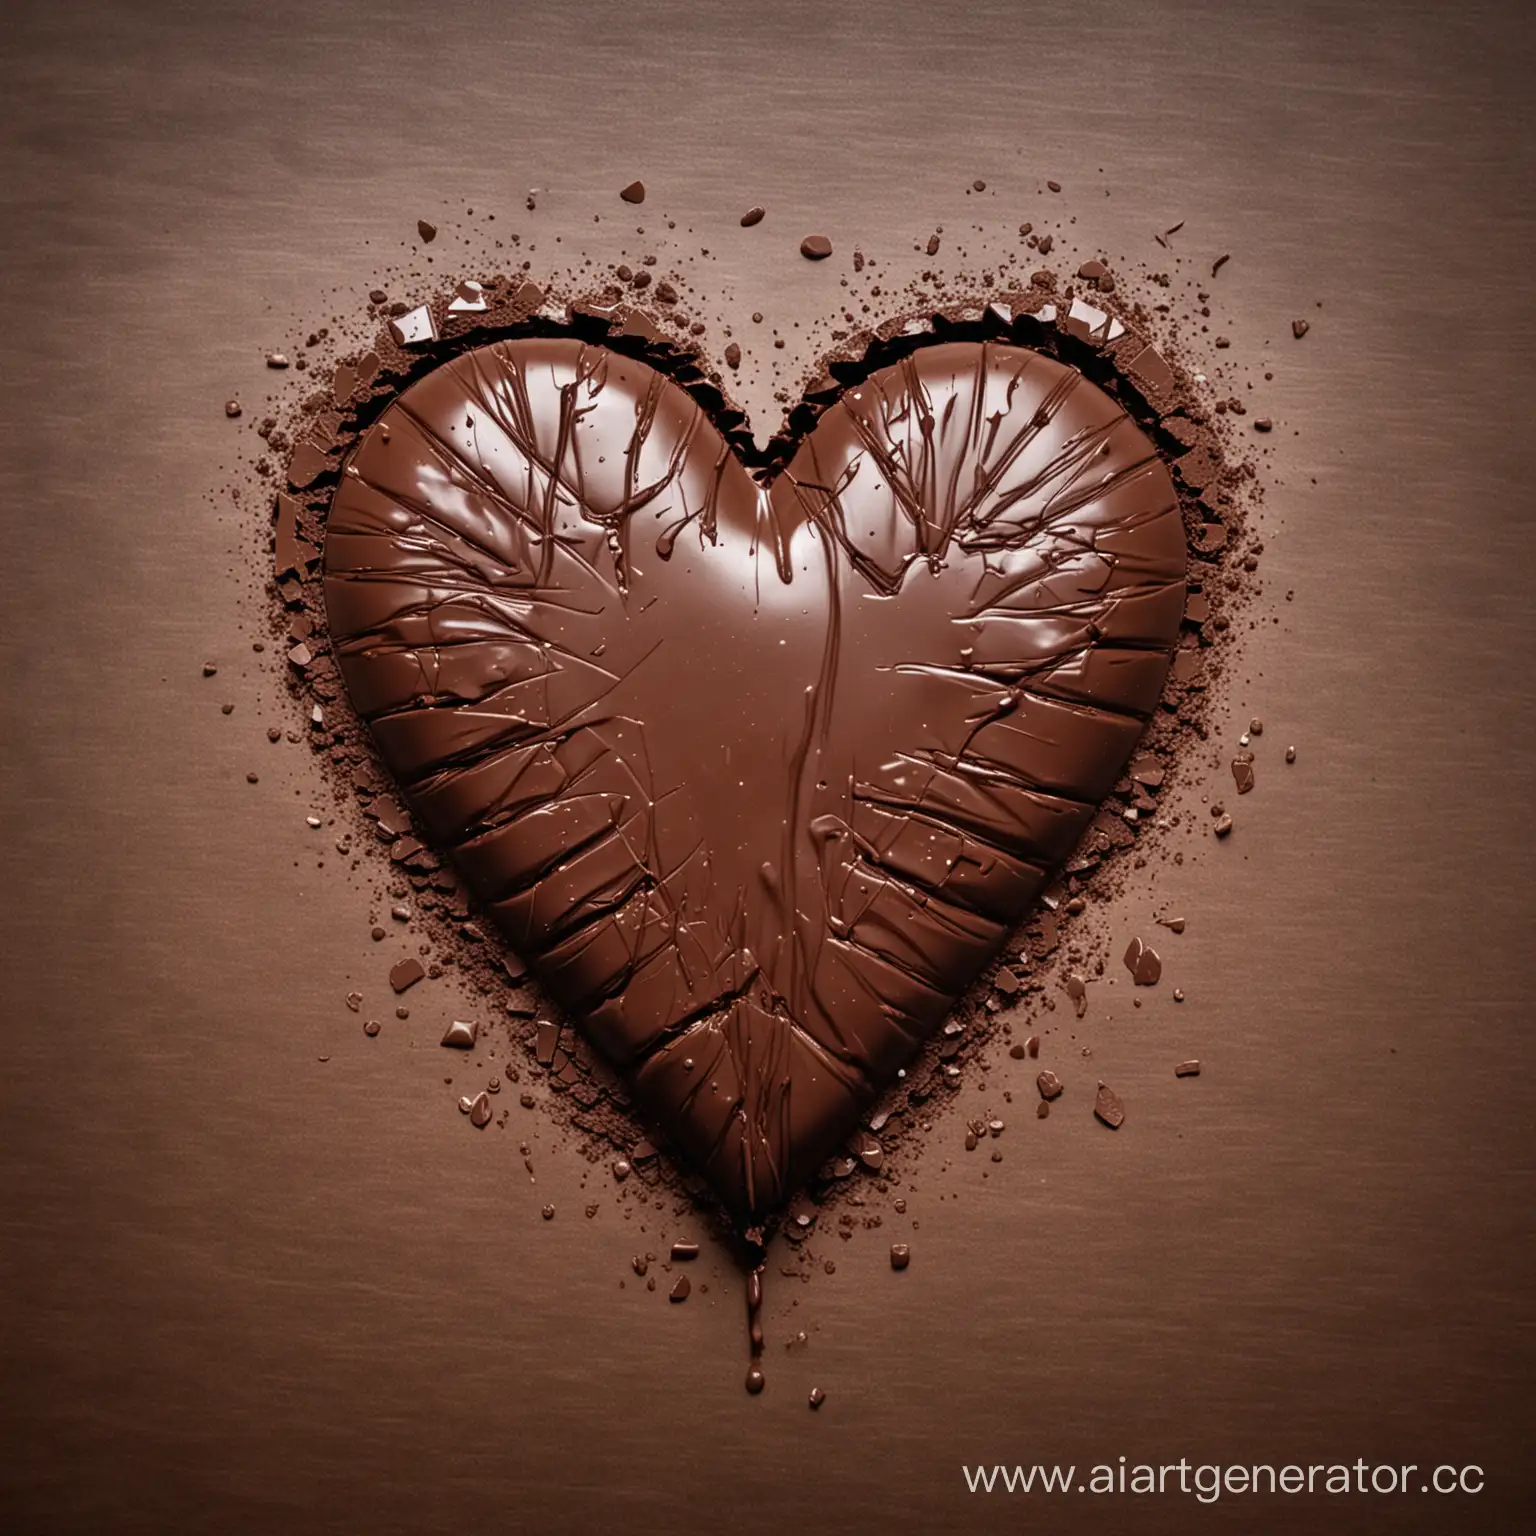 Cracked-Chocolate-Heart-Symbol-of-Love-and-Fragility